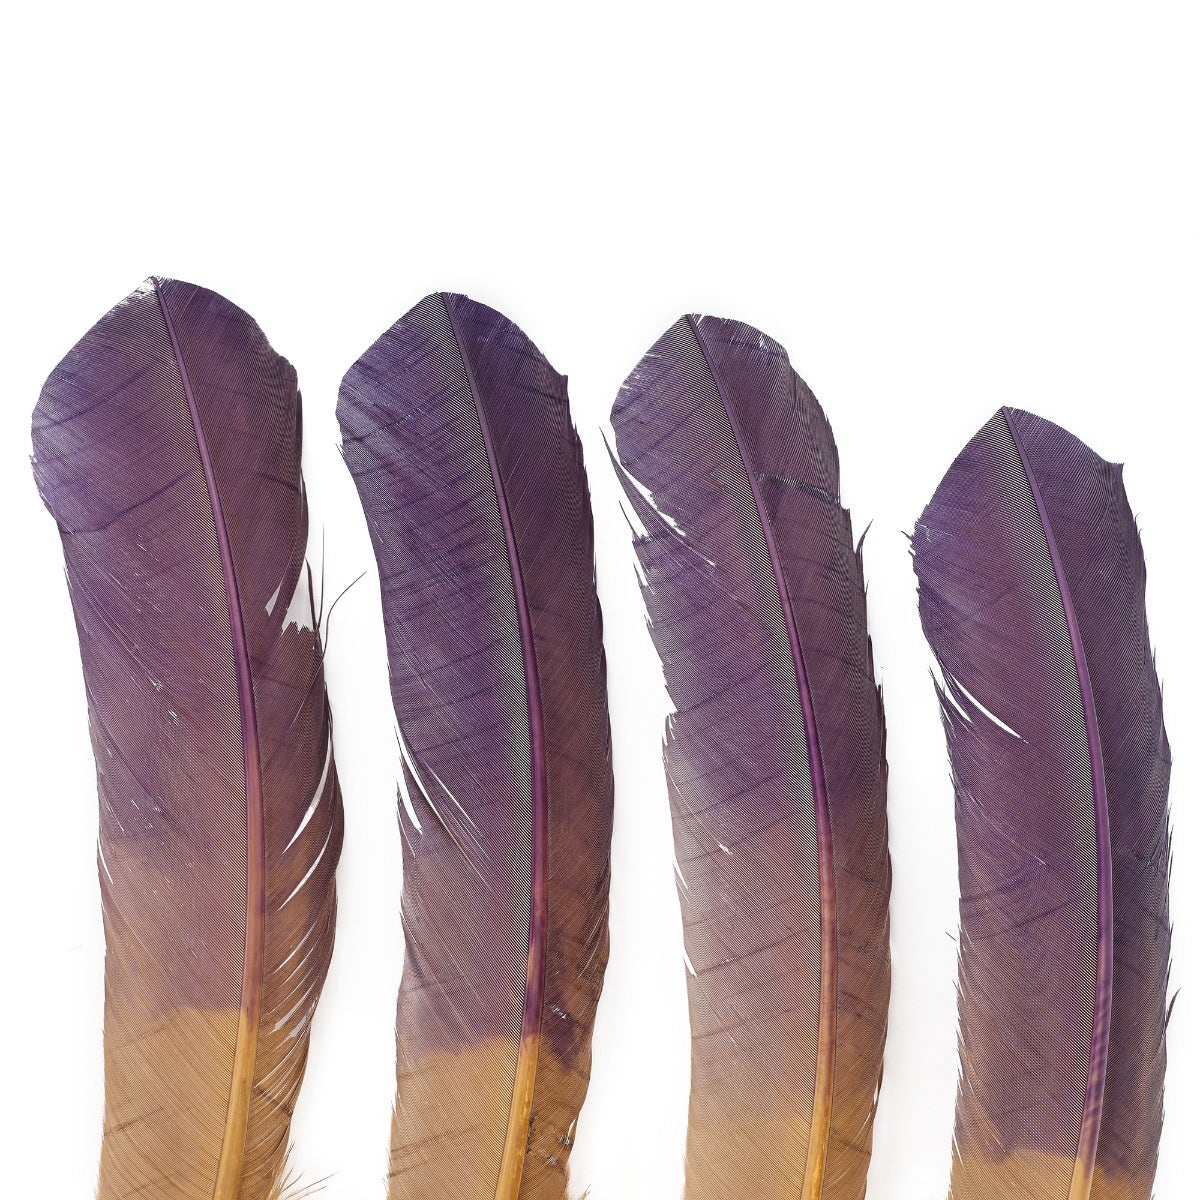 Bulk Two Tone Ombre Tipped Turkey Round Feathers Left Wing - 10-12” - 1/4 lb - Navy Camel